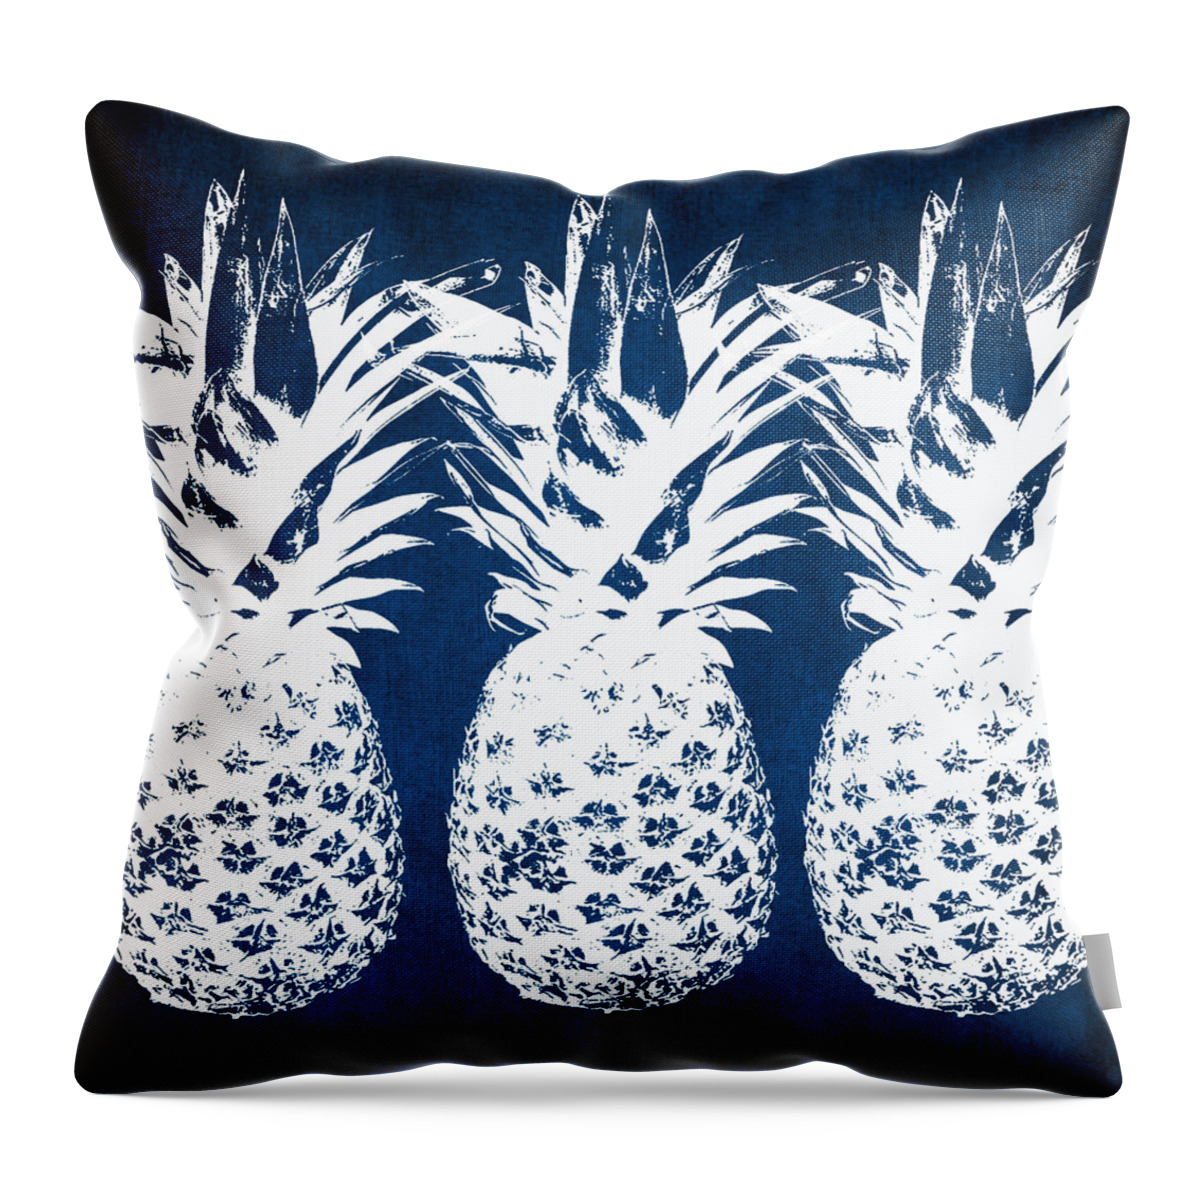 Indigo Throw Pillow featuring the painting Indigo and White Pineapples by Linda Woods